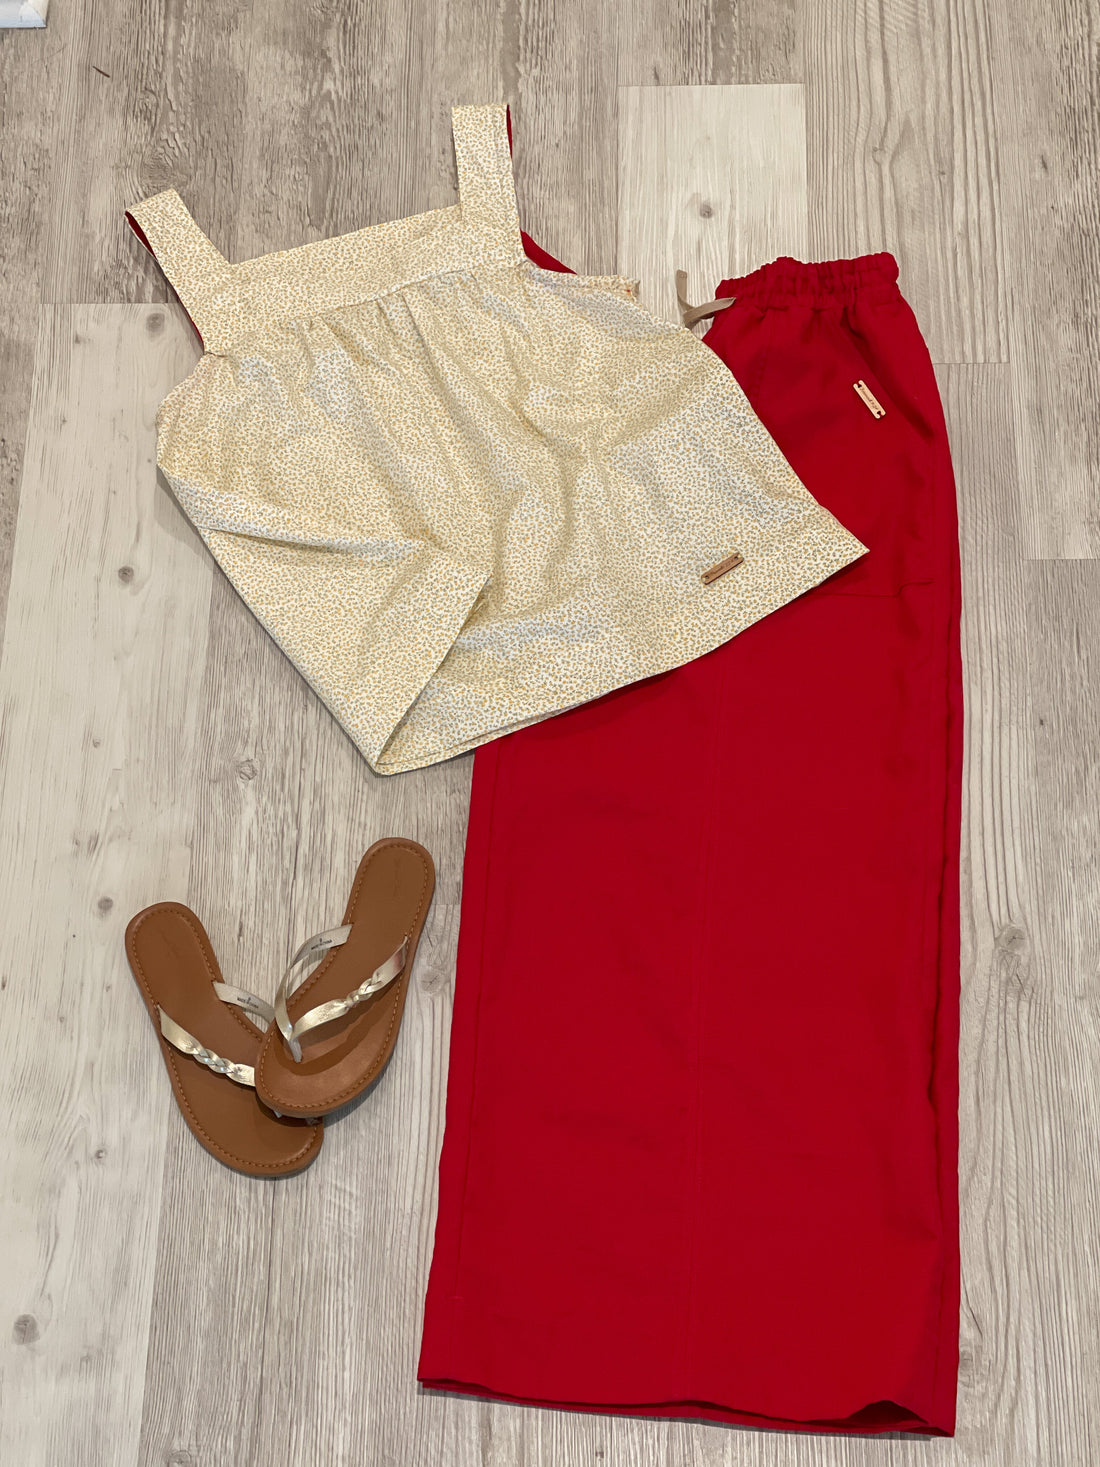 Flowy Wide Leg red linen palazzo Pants Paried with yellow floral Babydoll Tank Top and Sandals